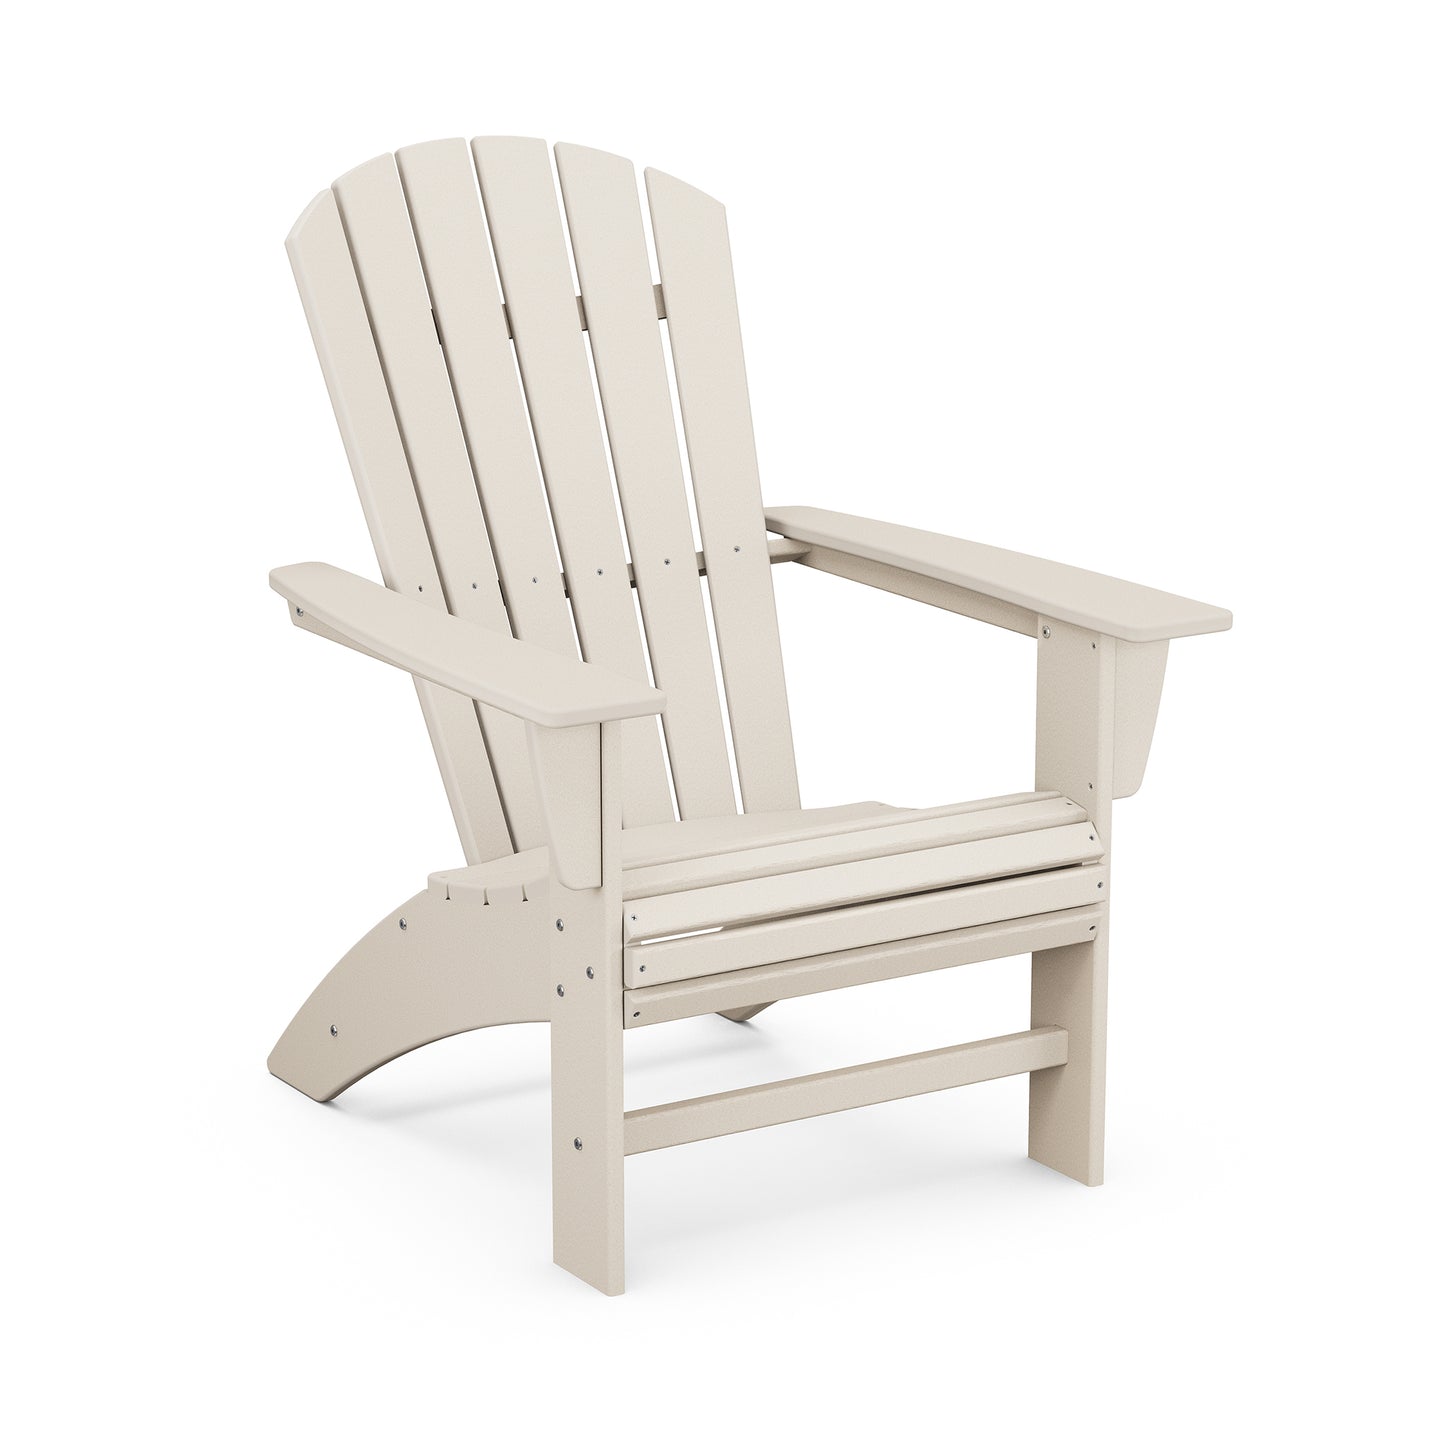 A beige eco-friendly POLYWOOD Nautical Curveback Adirondack chair made of POLYWOOD® lumber, featuring a slatted design with a tall back and wide armrests, isolated on a white background.